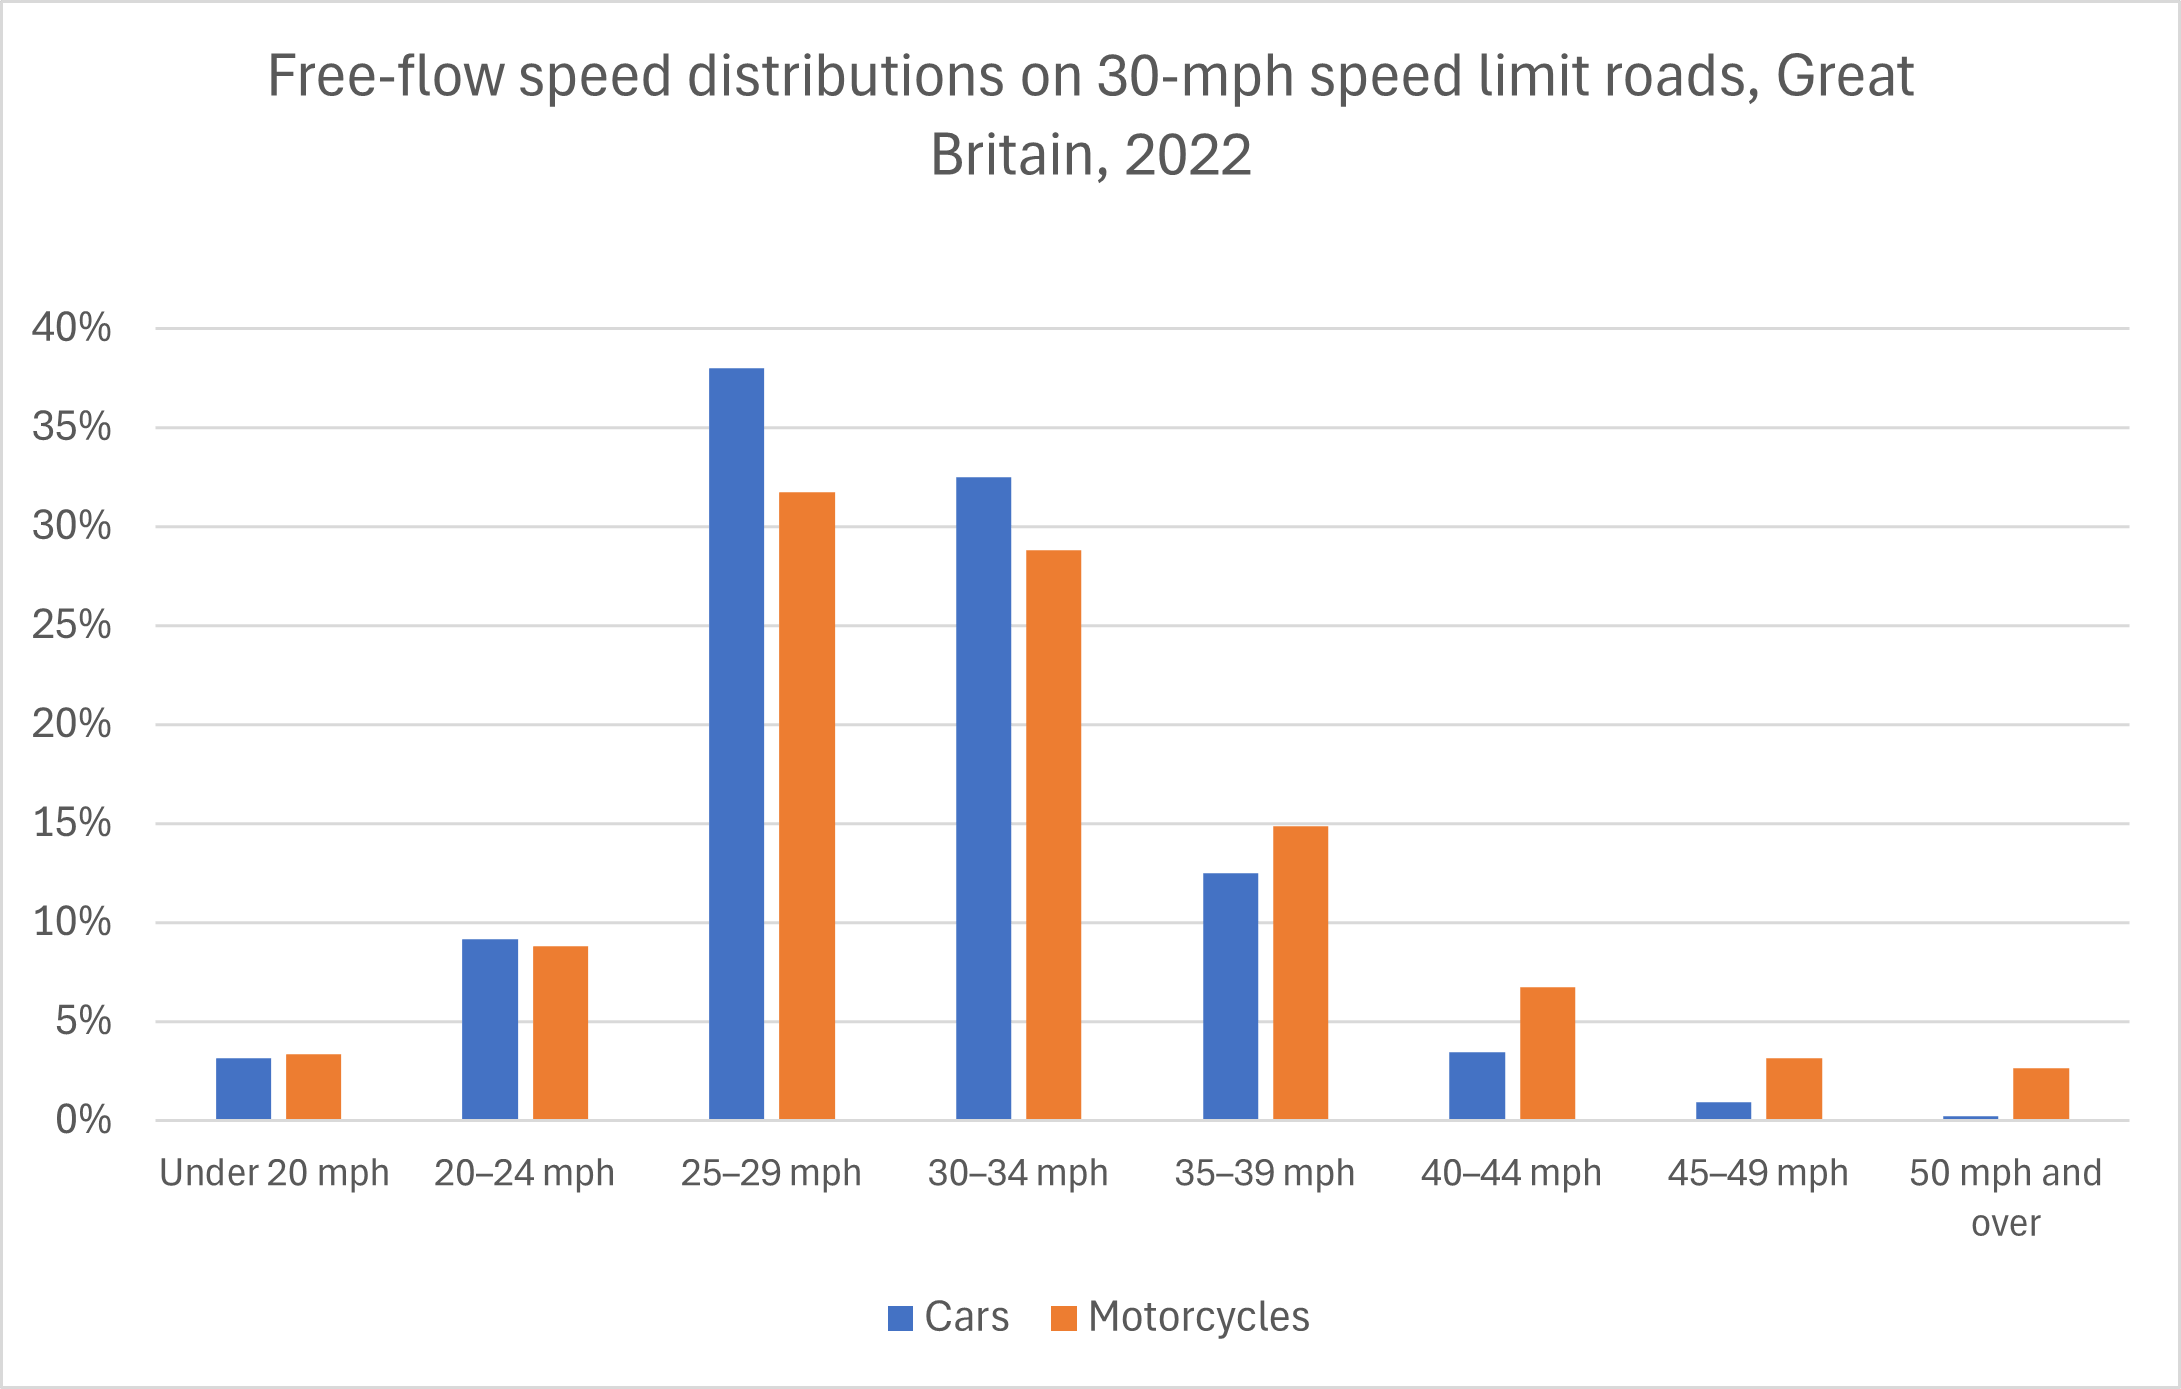 Free-flow speed distributions - 30-mph roads